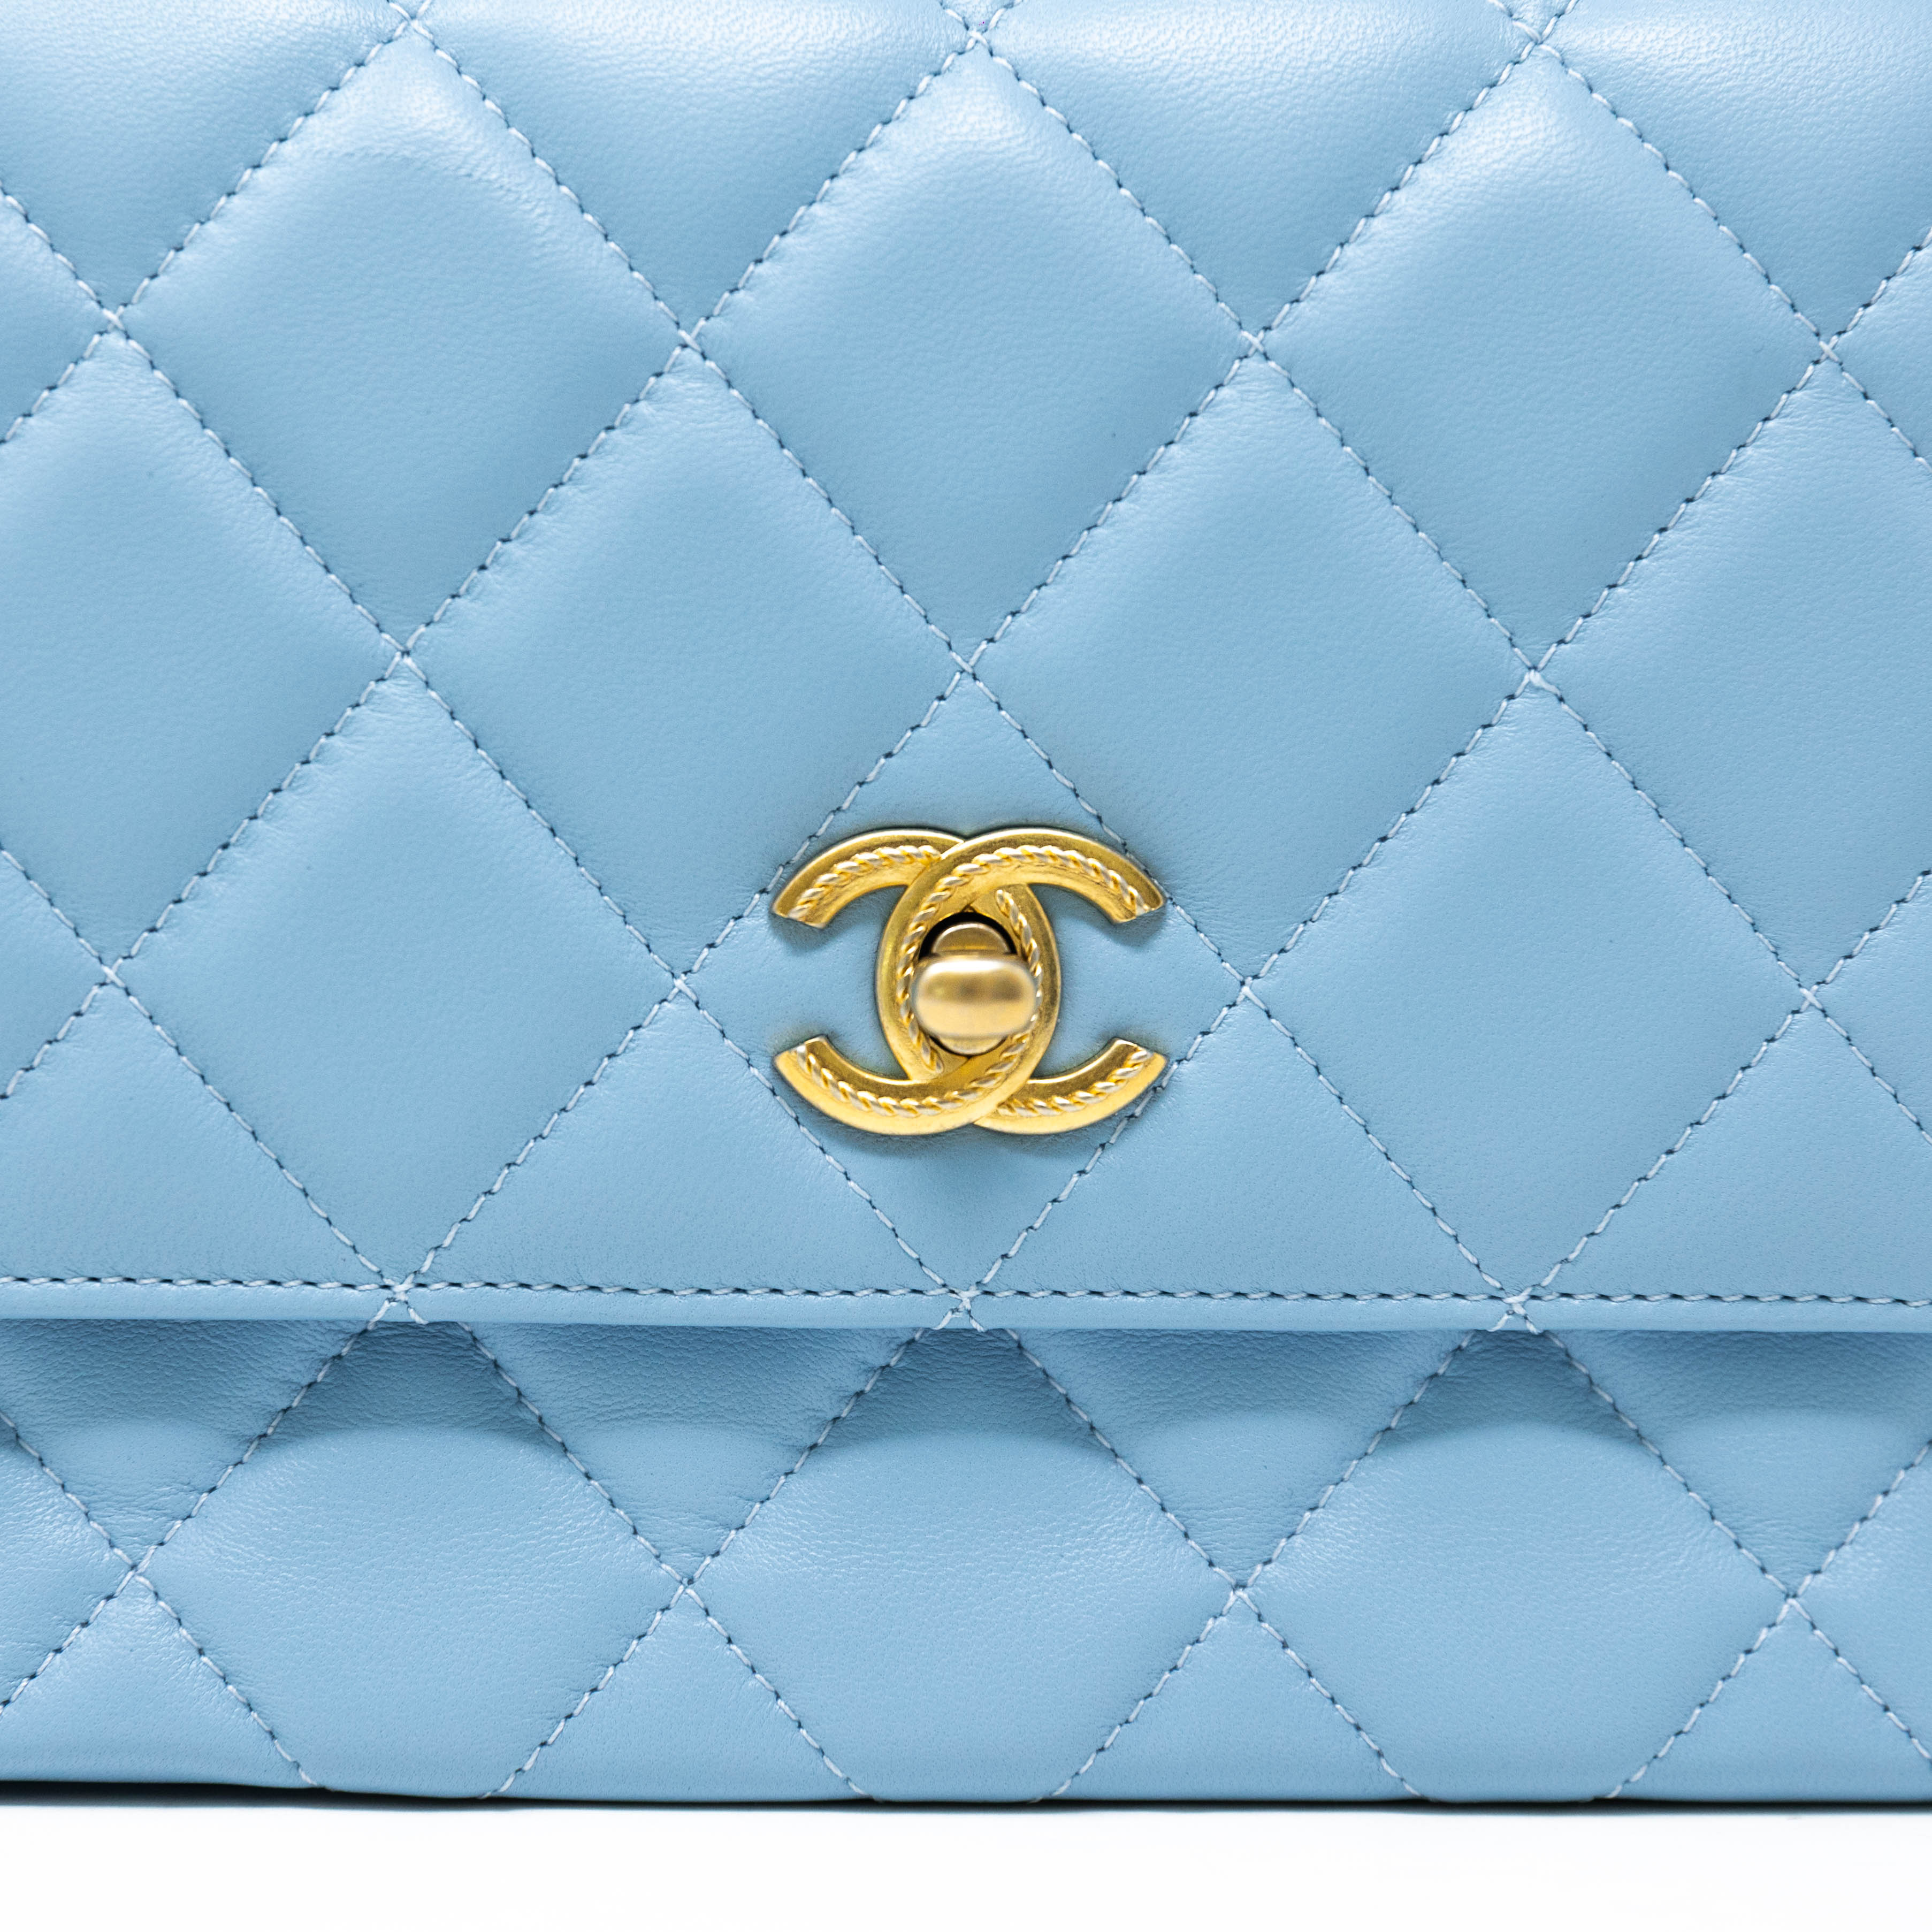 Chanel Blue Small Top Handle Flap Bag